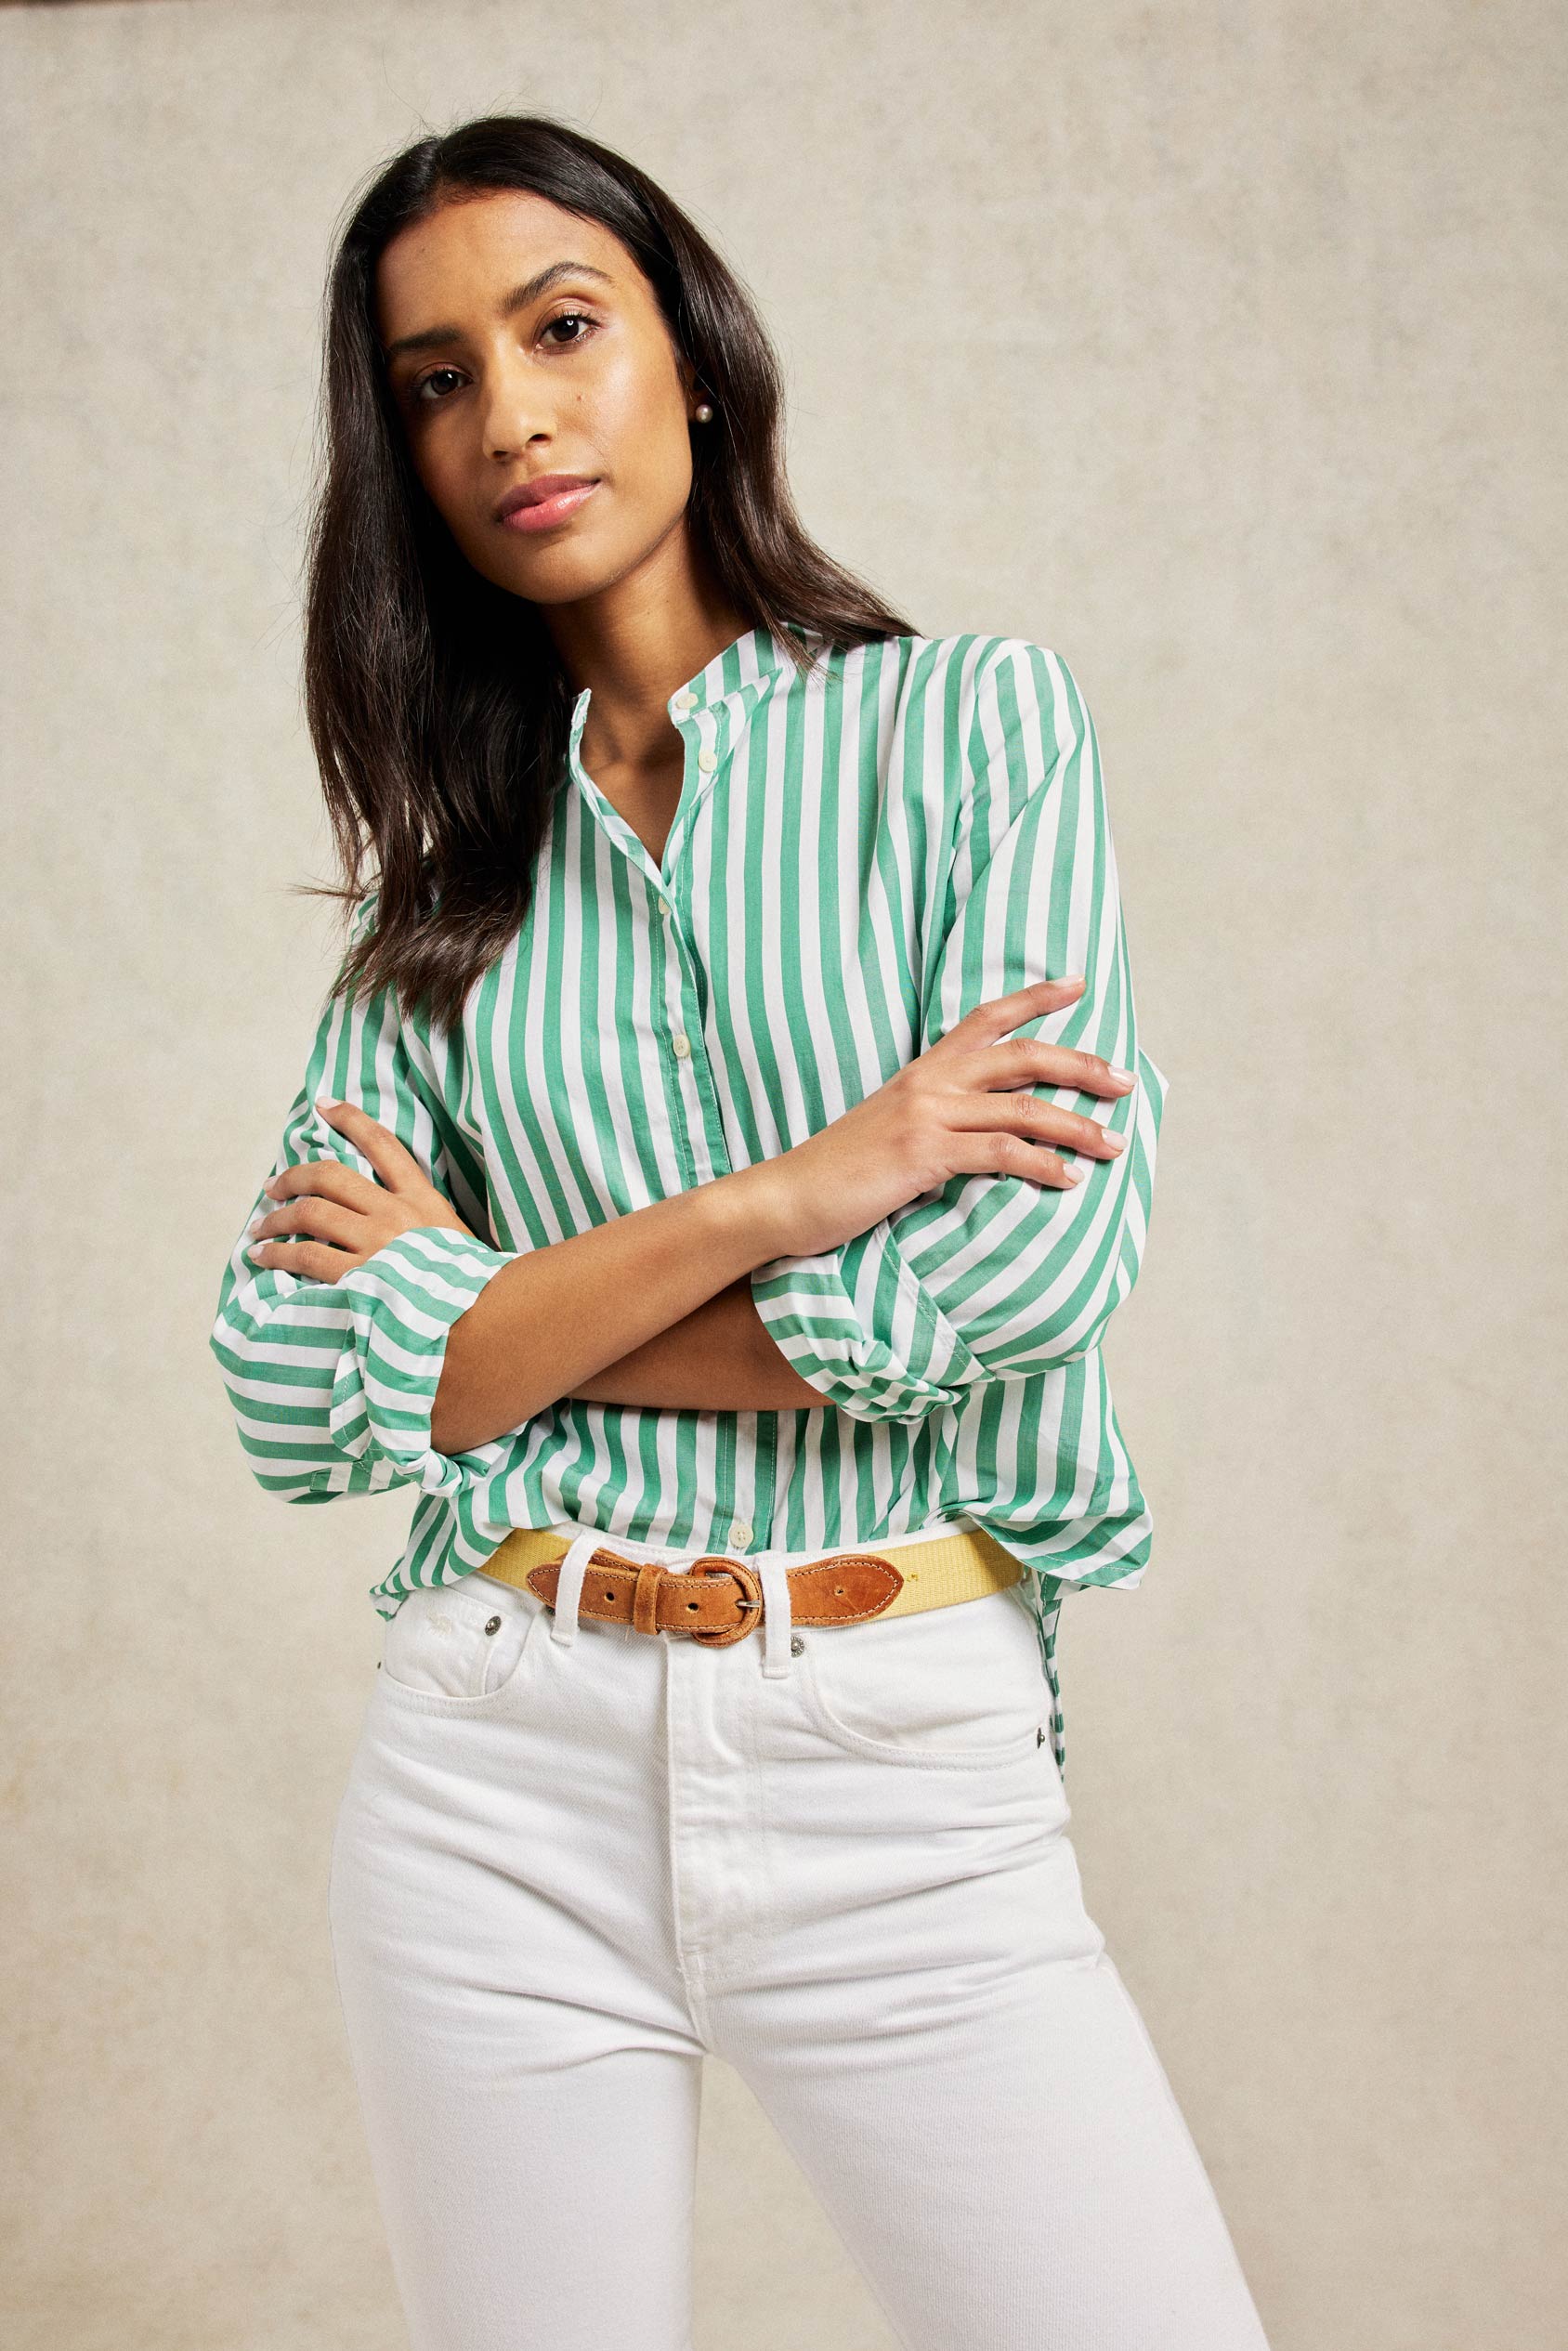 Basil-green stripes transform the Shadblow shirt into a serious mood-booster. Cut from cotton to our favourite boyfriend fit with a chic Nehru collar. Casual wear. Size XS, S, M, L, XL. Machine wash. Made in Portugal.